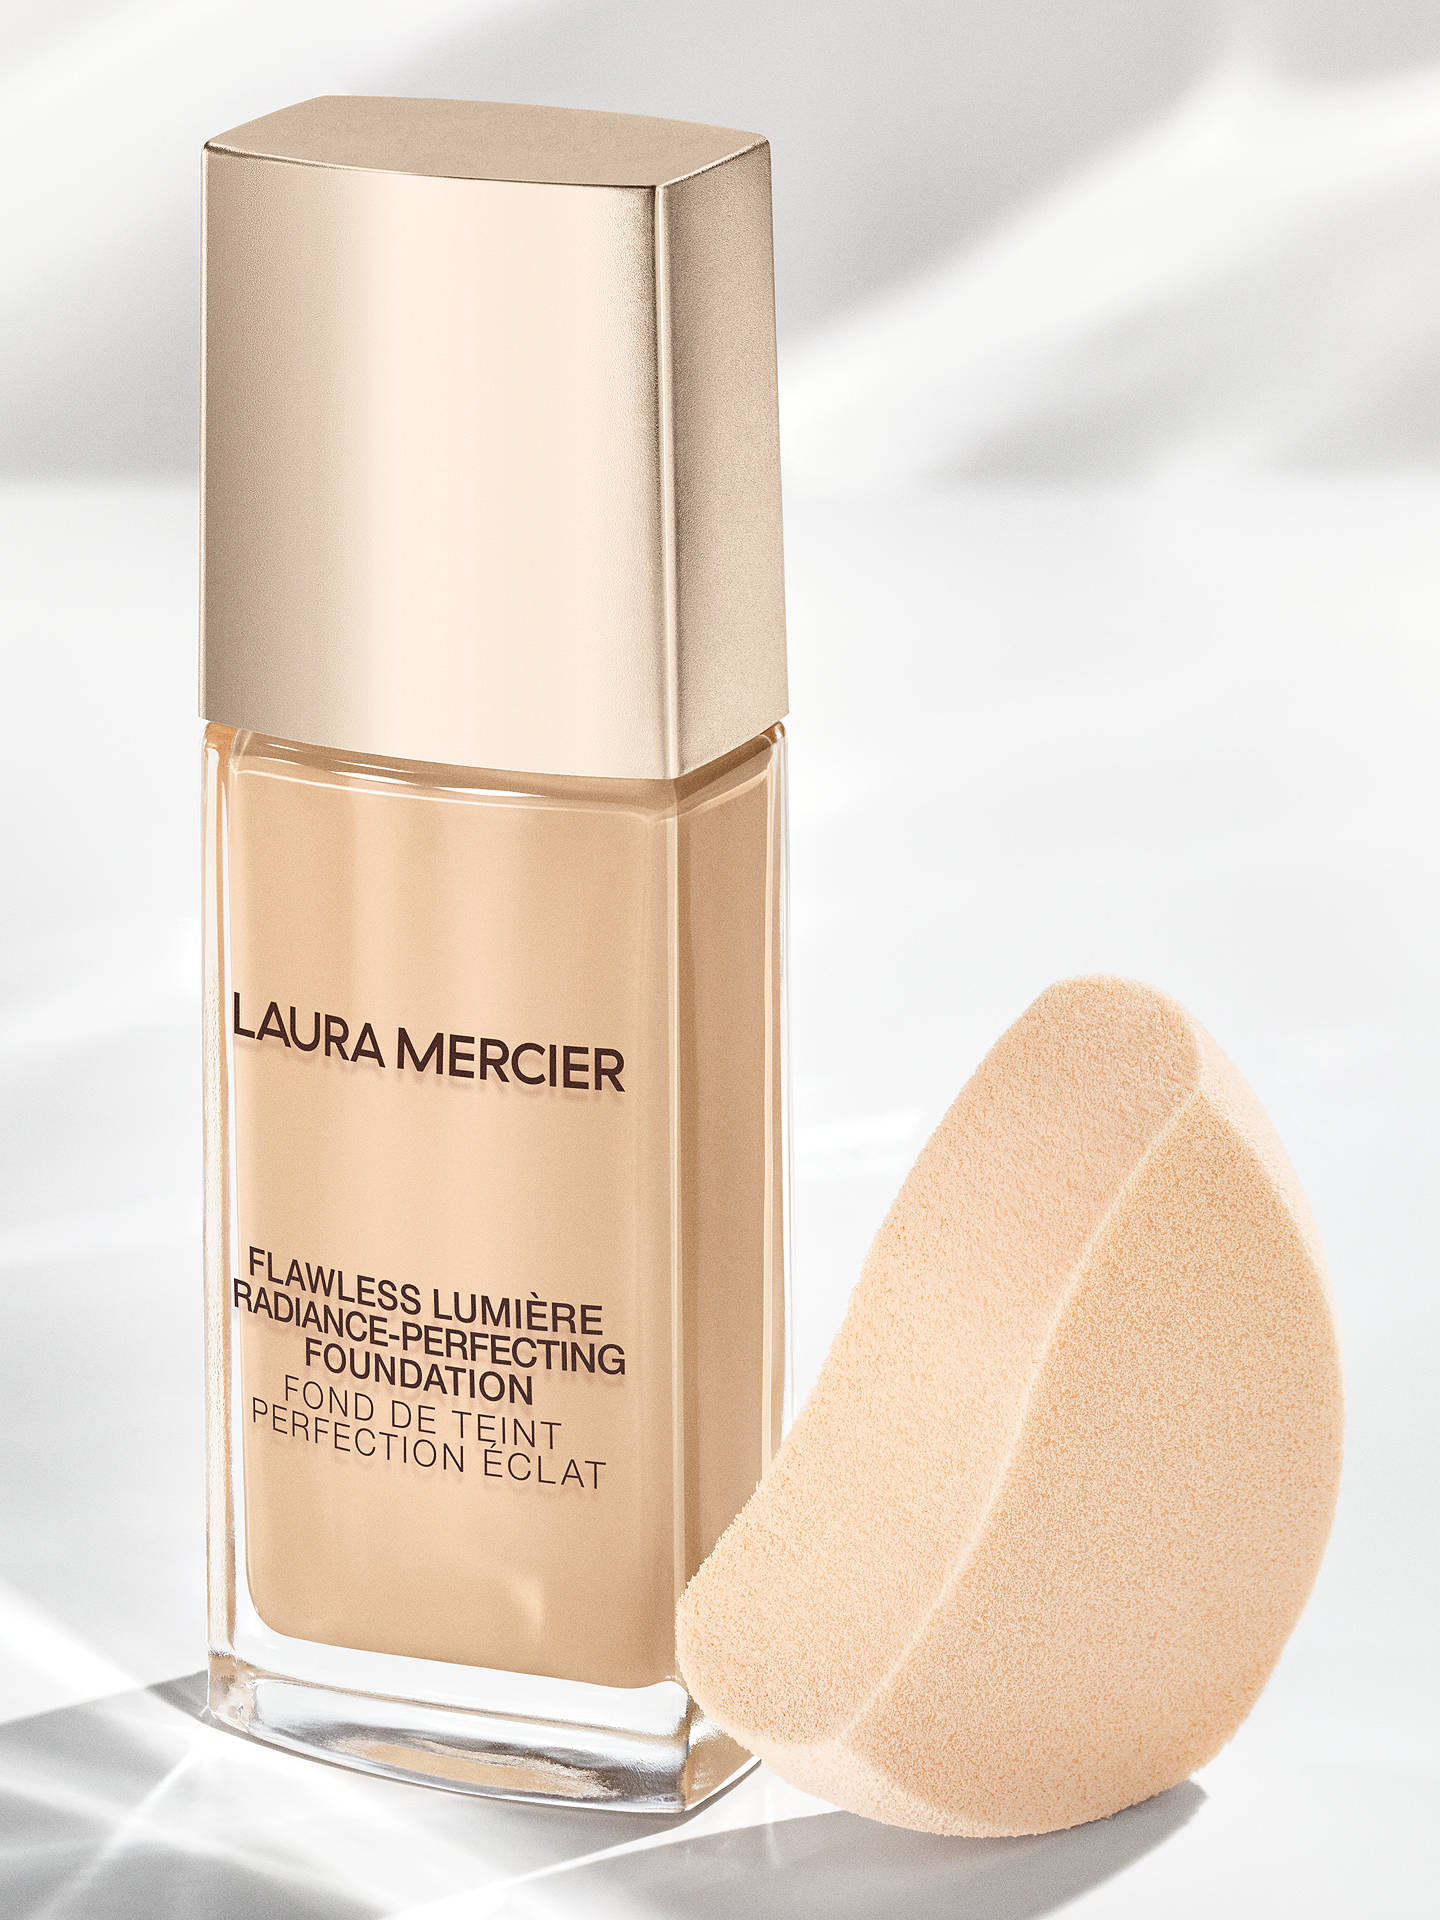 LAURA MERCIER Flawless Lumiere Radiance Perfecting Foundation Ambient